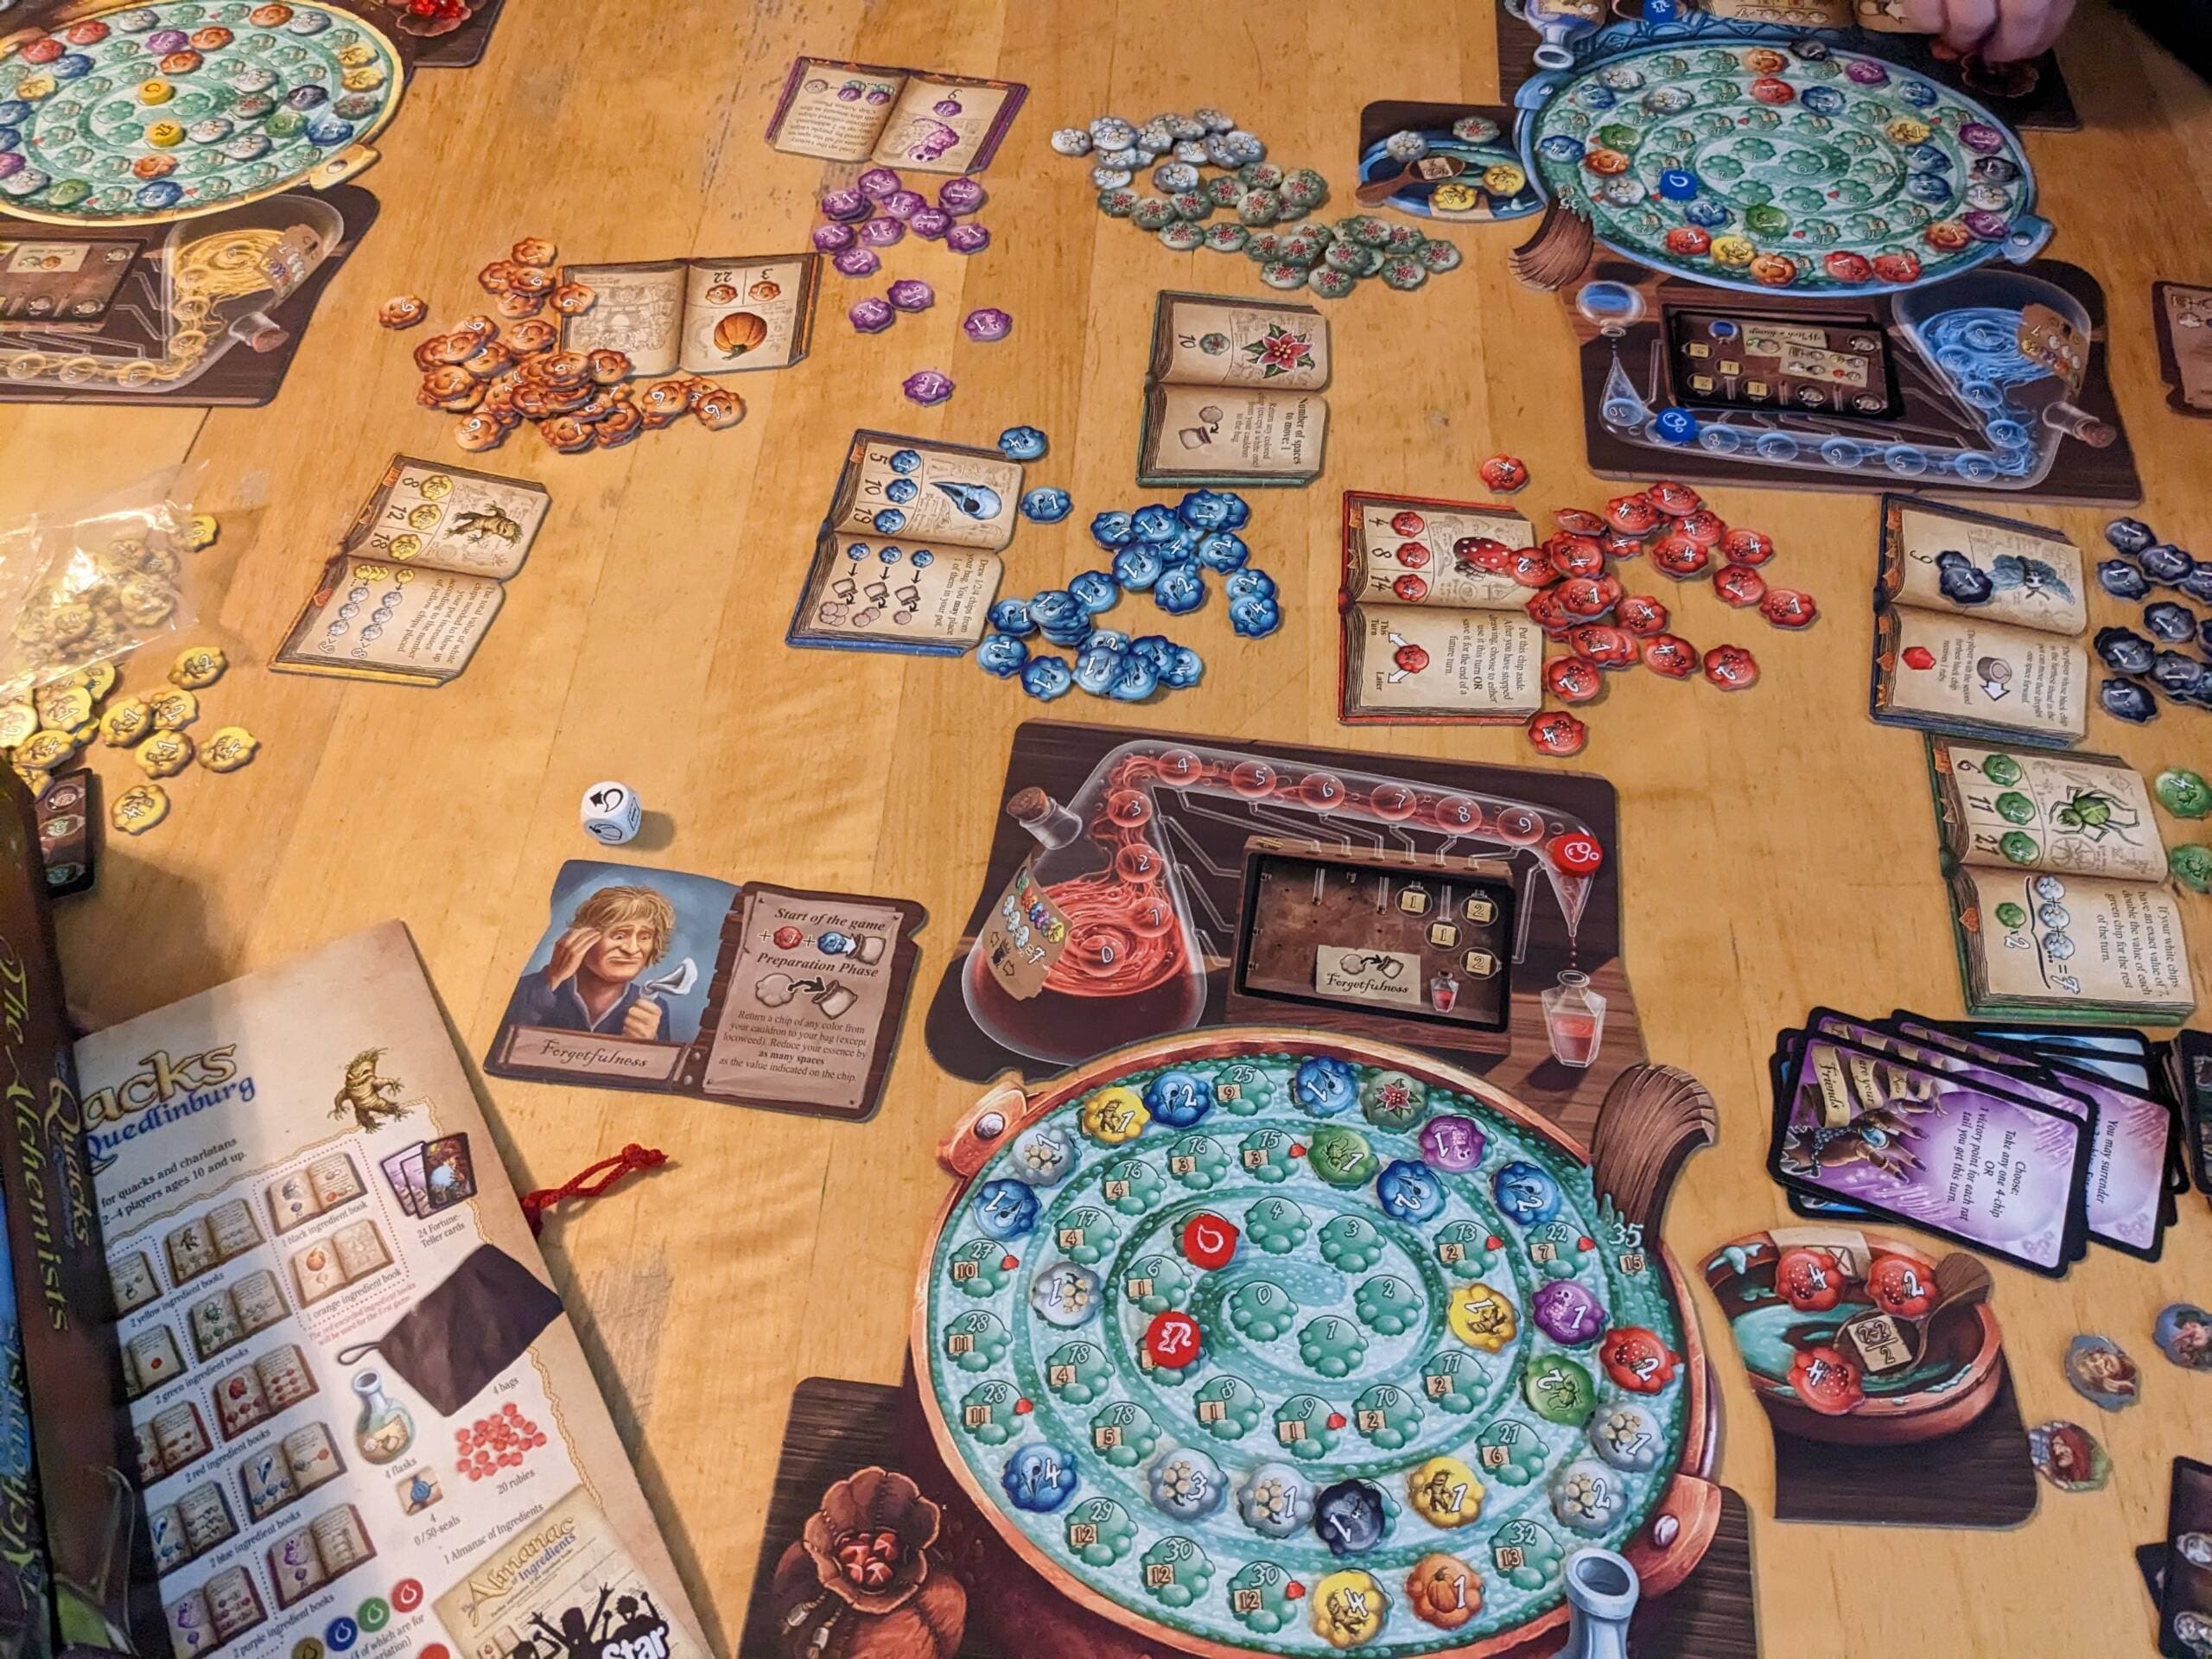 "Quacks of Quedlinburg," along with its most recent expansion "The Alchemists." (James Mastromarino/Here & Now)